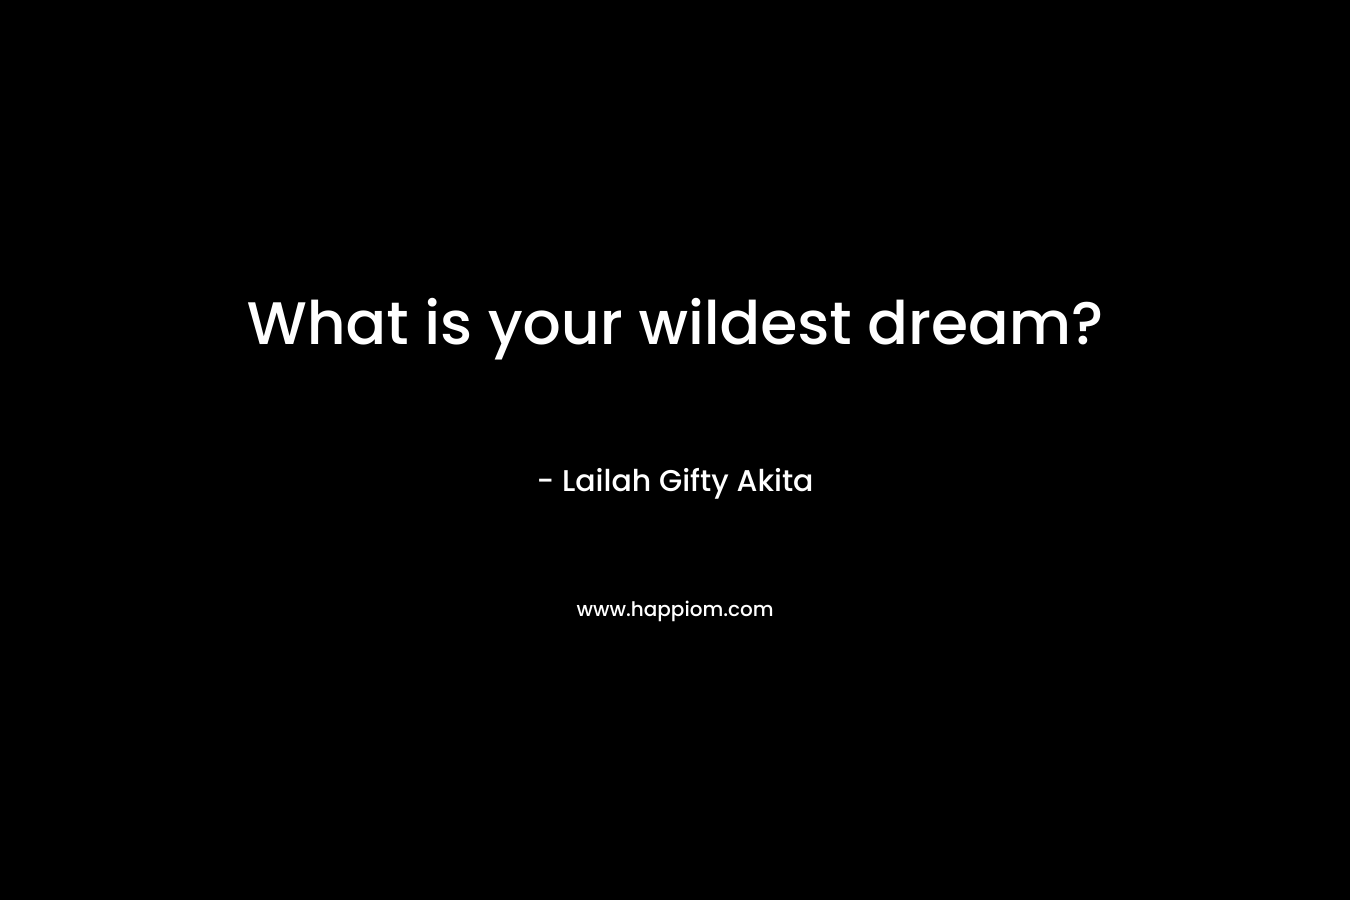 What is your wildest dream?